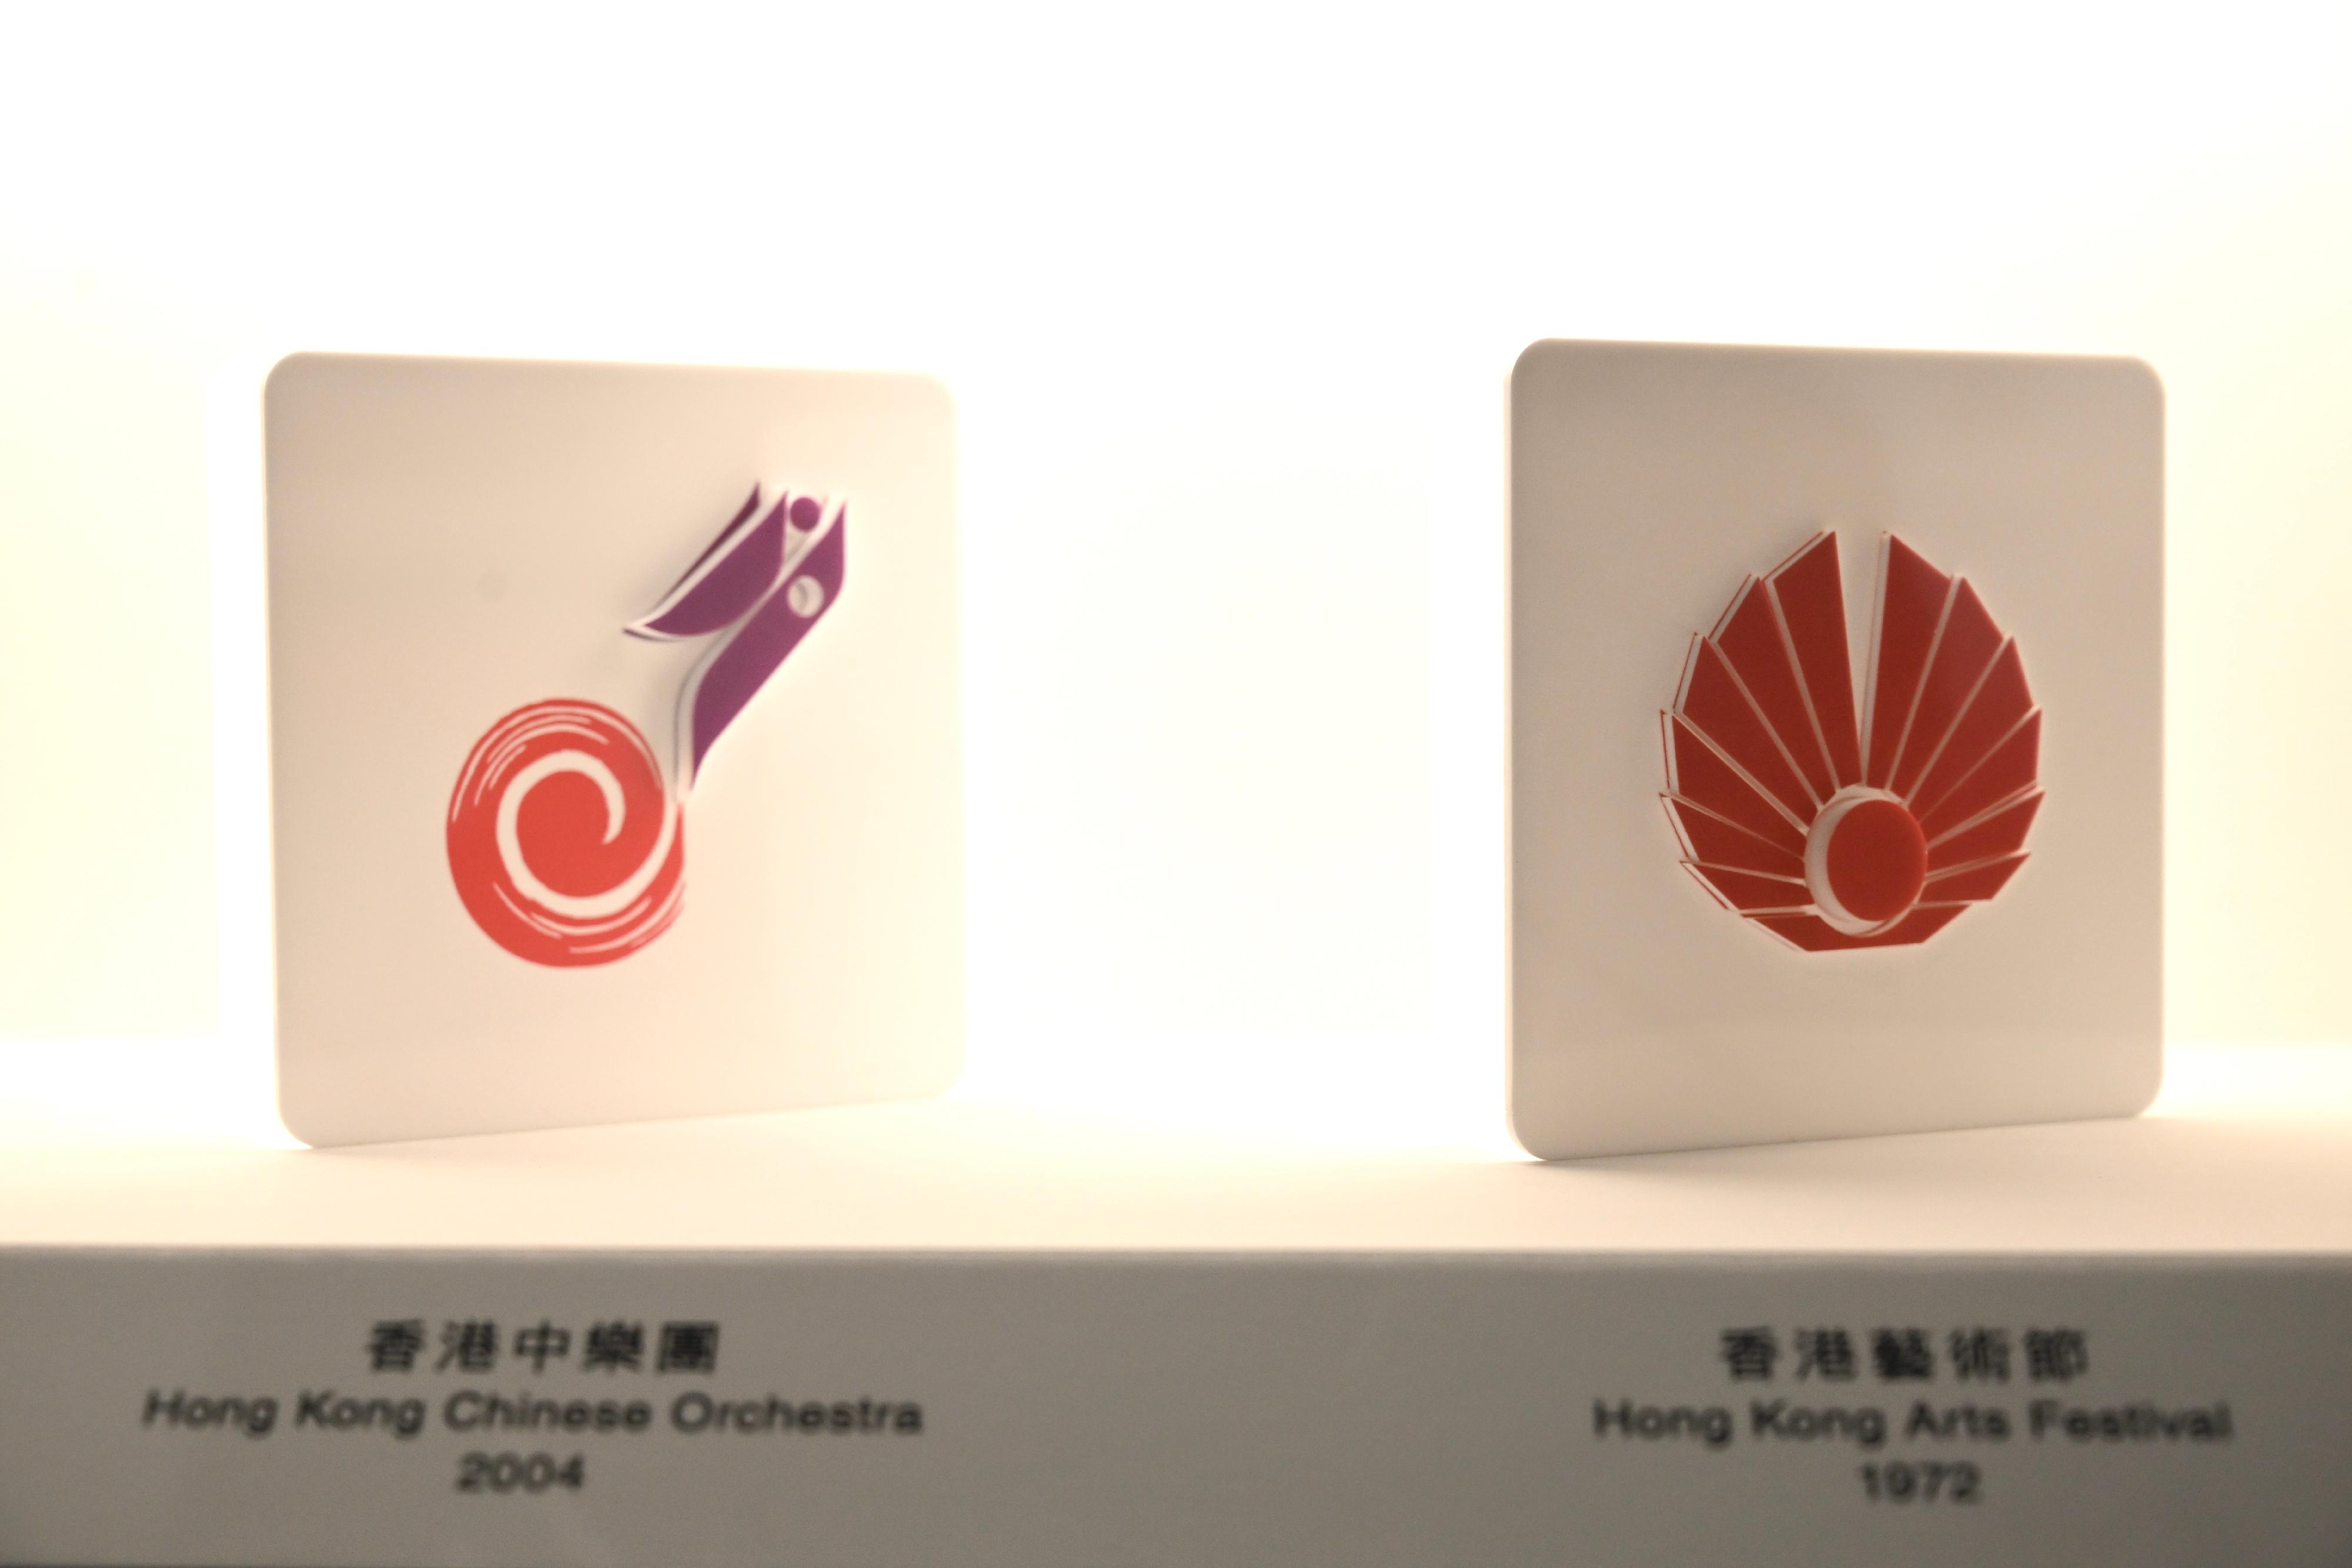 The opening ceremony for "The Reflection - Art & Design of Hon Bing-wah" exhibition was held today (November 14) at the Hong Kong Heritage Museum. Photo shows logo designs for the Hong Kong Chinese Orchestra (left) and the Hong Kong Arts Festival (right).